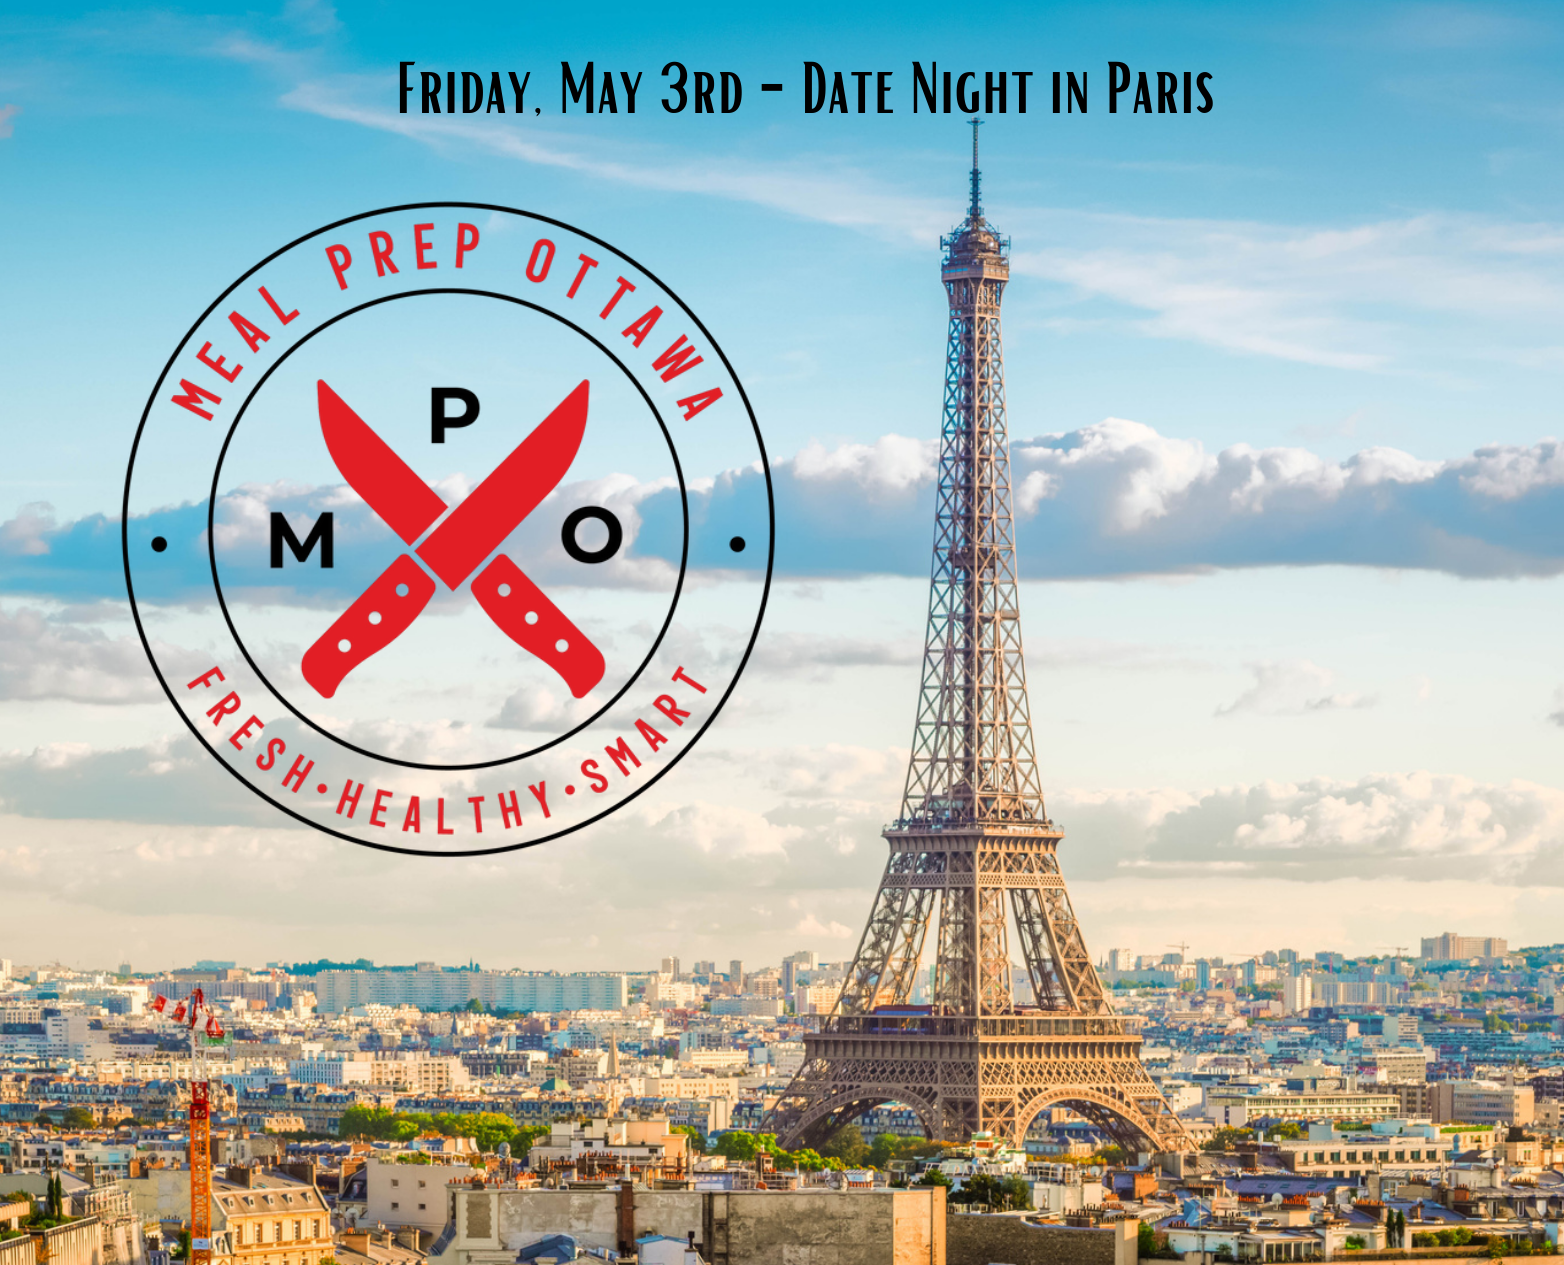 Date Night in Paris - Friday, May 3rd